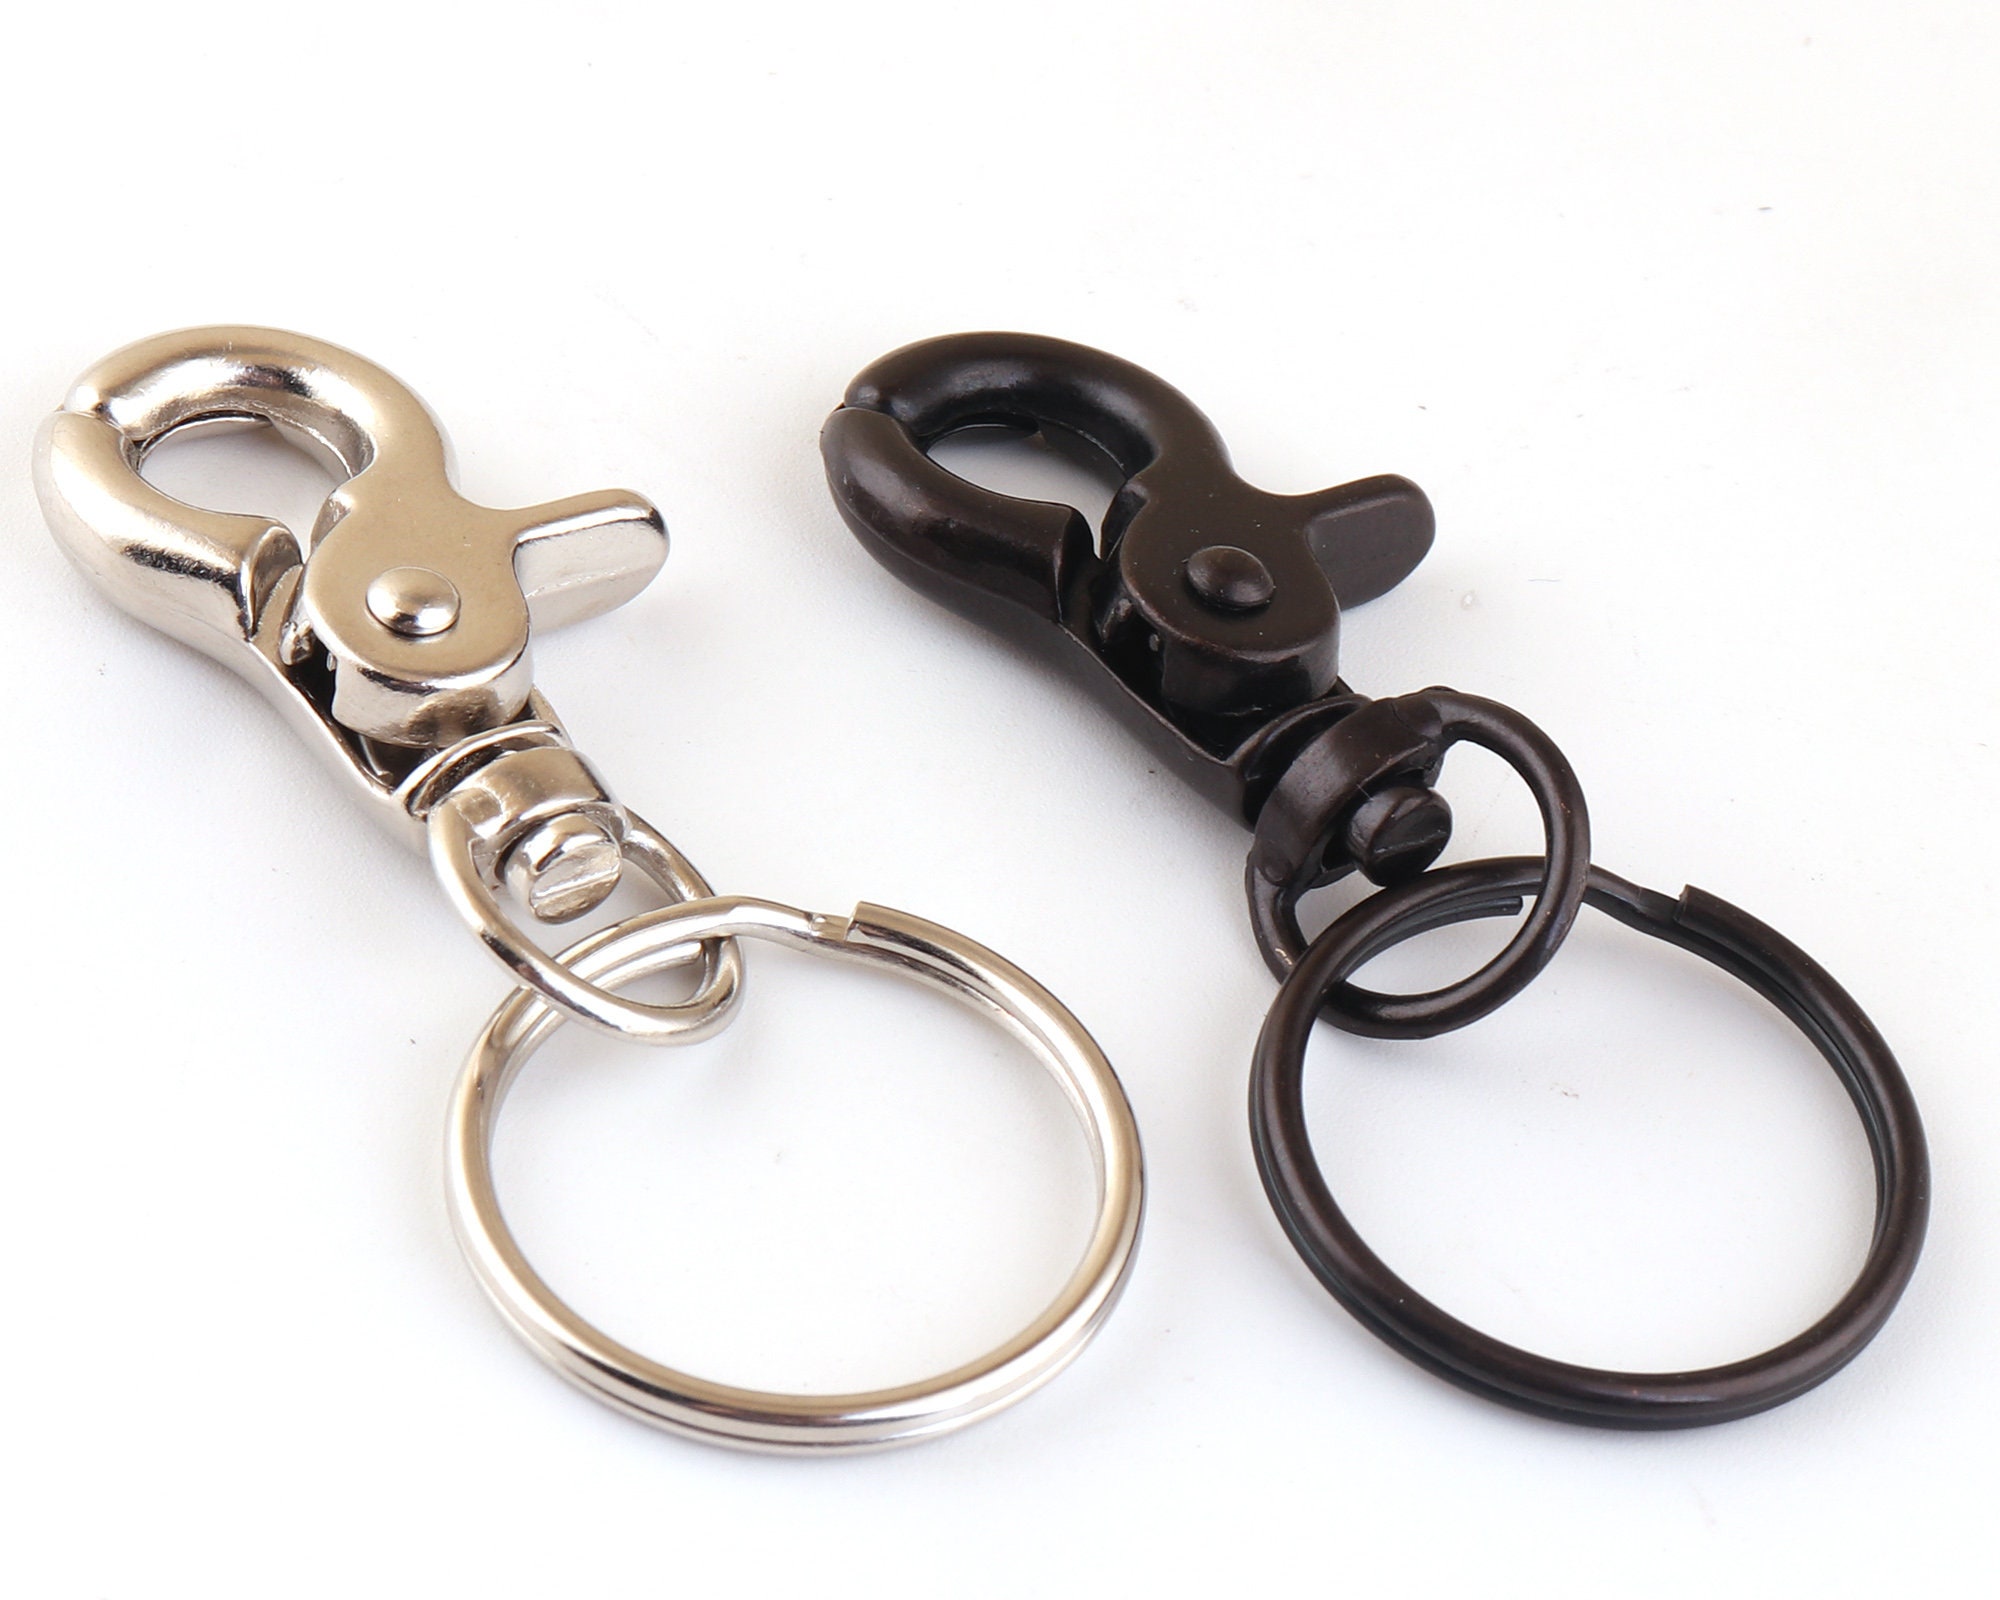 Silver and Black Swivel Hook Keychain With Key Rings includes Classic  Lobster Swivels and 1 Inch Key Ring Loops keychain Fobs key Chains 